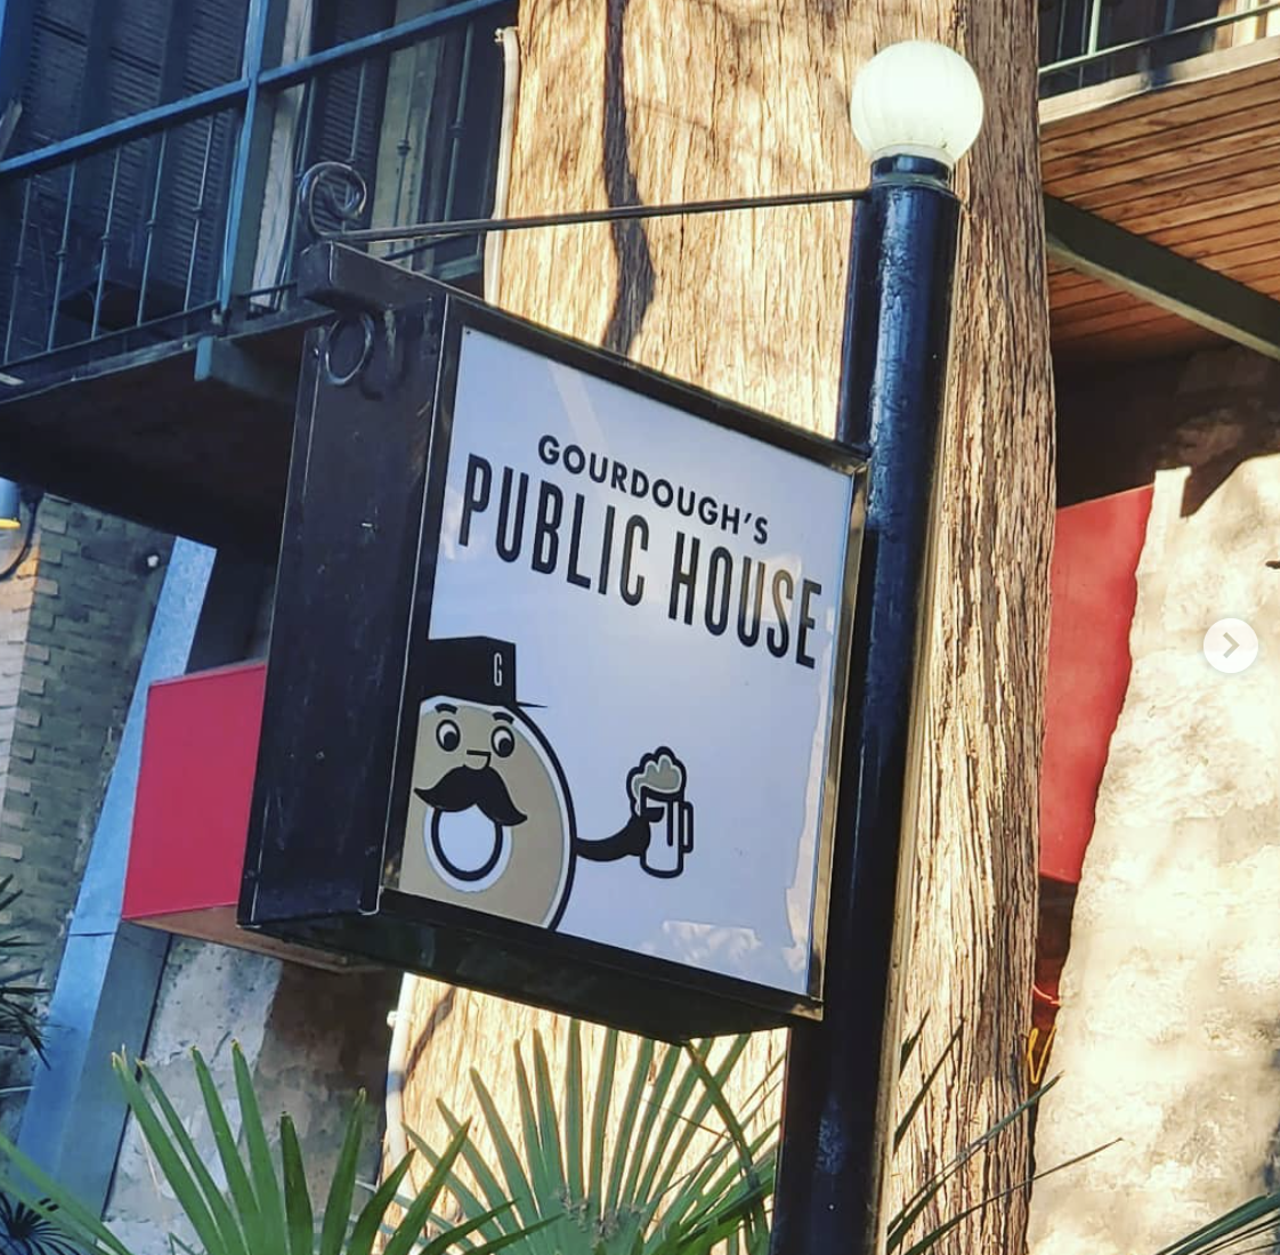 Gourdough's Public House
215 Losoya St.
Austin-based Gourdough's opened its first San Antonio location on the famed Riverwalk to pretty impressive fanfare, but it wasn’t enough to keep the location afloat. Gourdough’s San Antonio filed for Chapter 7 bankruptcy protection May 6. 
Photo via Instagram /  
quimmble